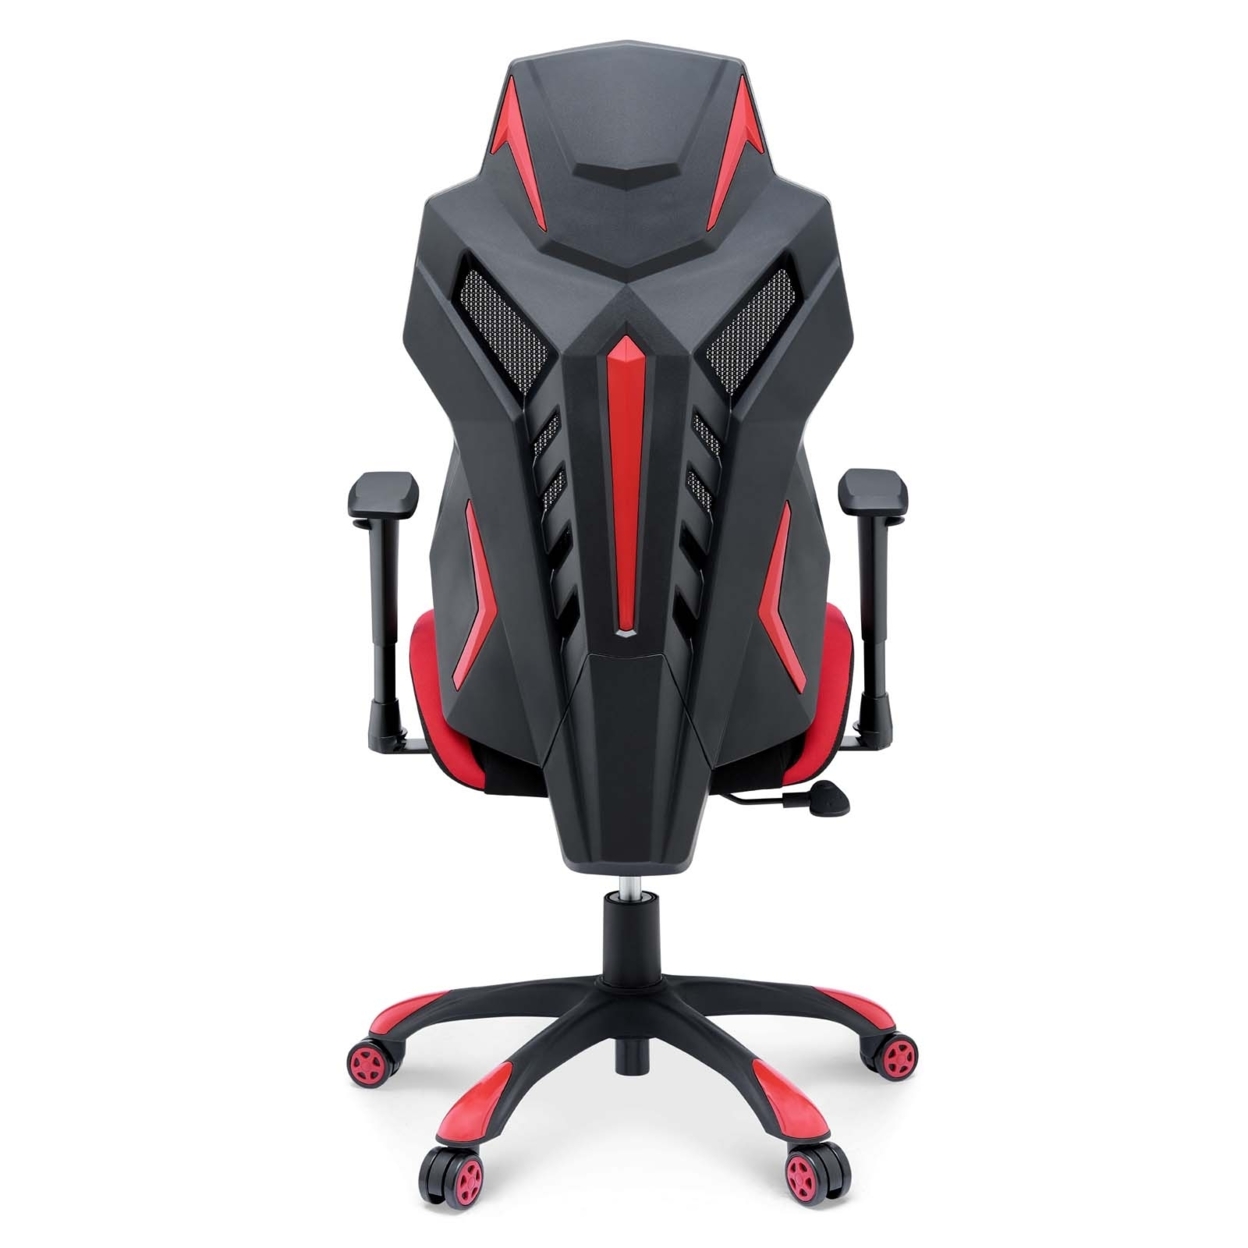 Modway Speedster Modern Mesh Fabric Gaming Computer Chair in Black/Red - image 5 of 8